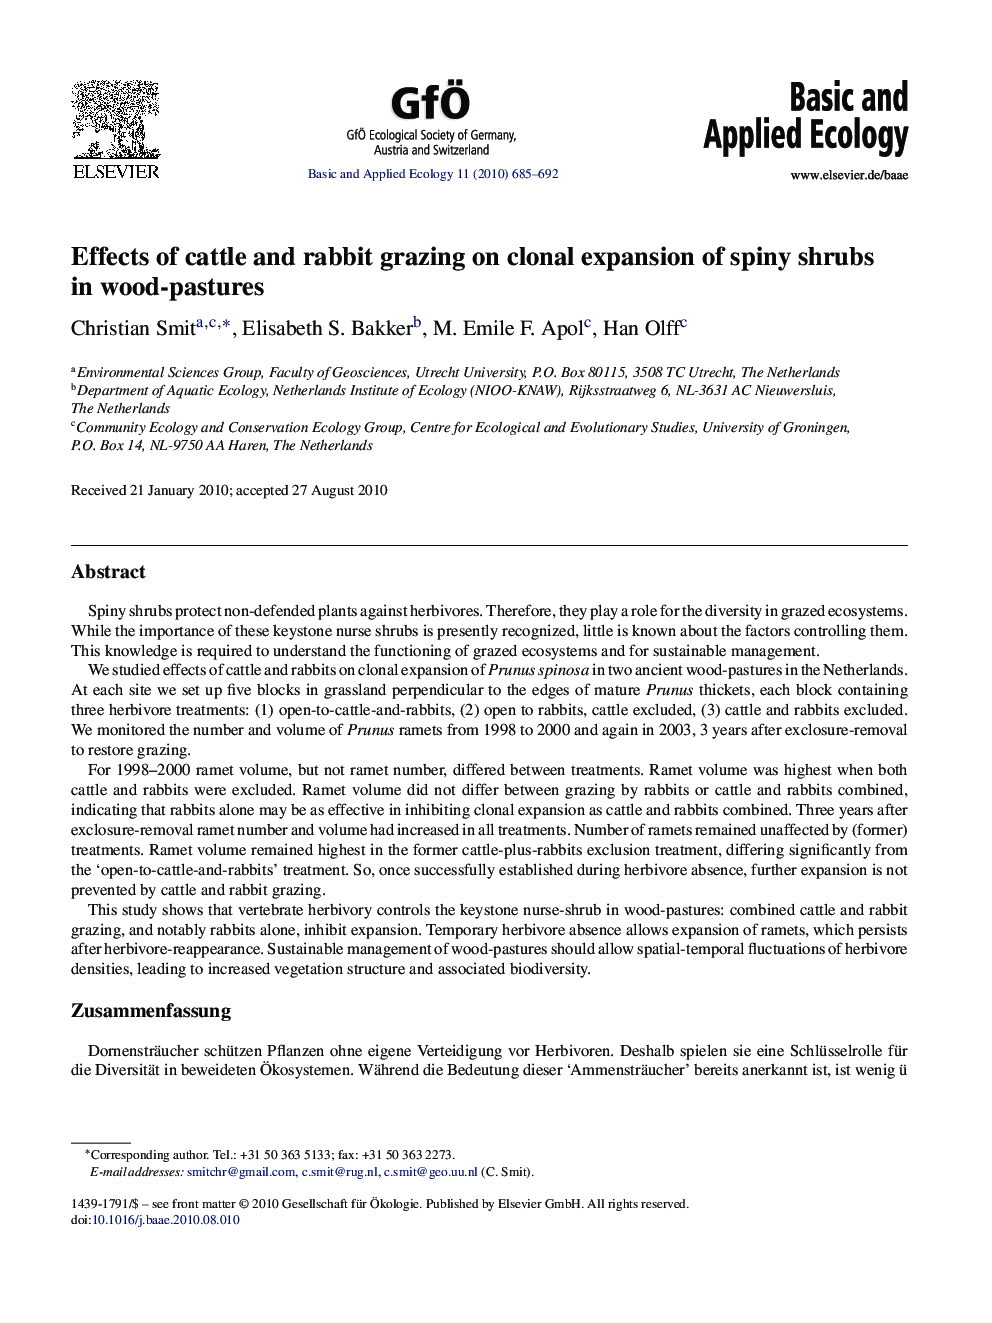 Effects of cattle and rabbit grazing on clonal expansion of spiny shrubs in wood-pastures